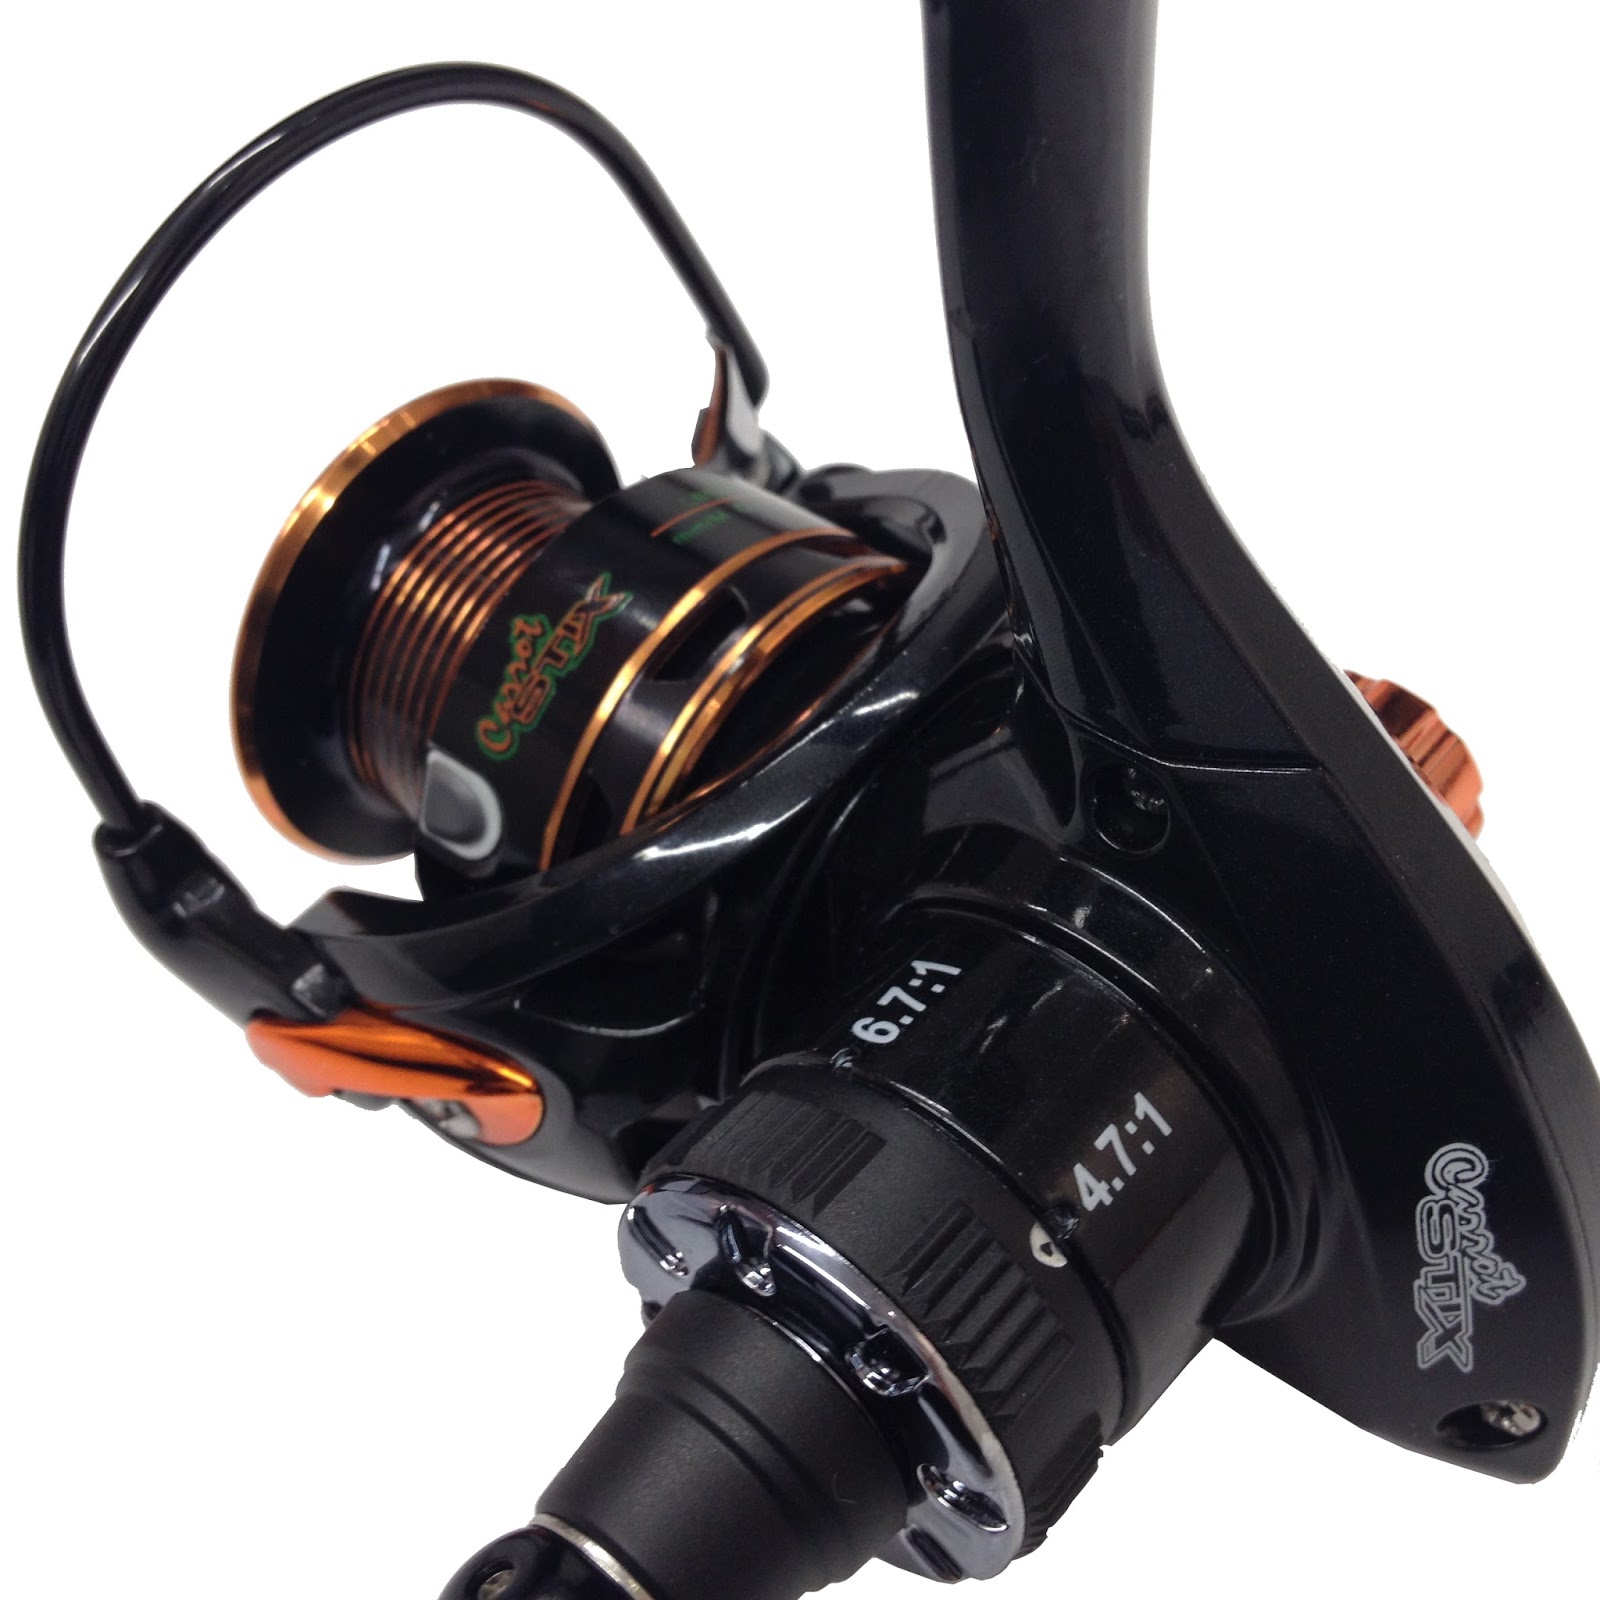 IBASSIN: ICAST 2016: Two New Reels from Carrot Stix